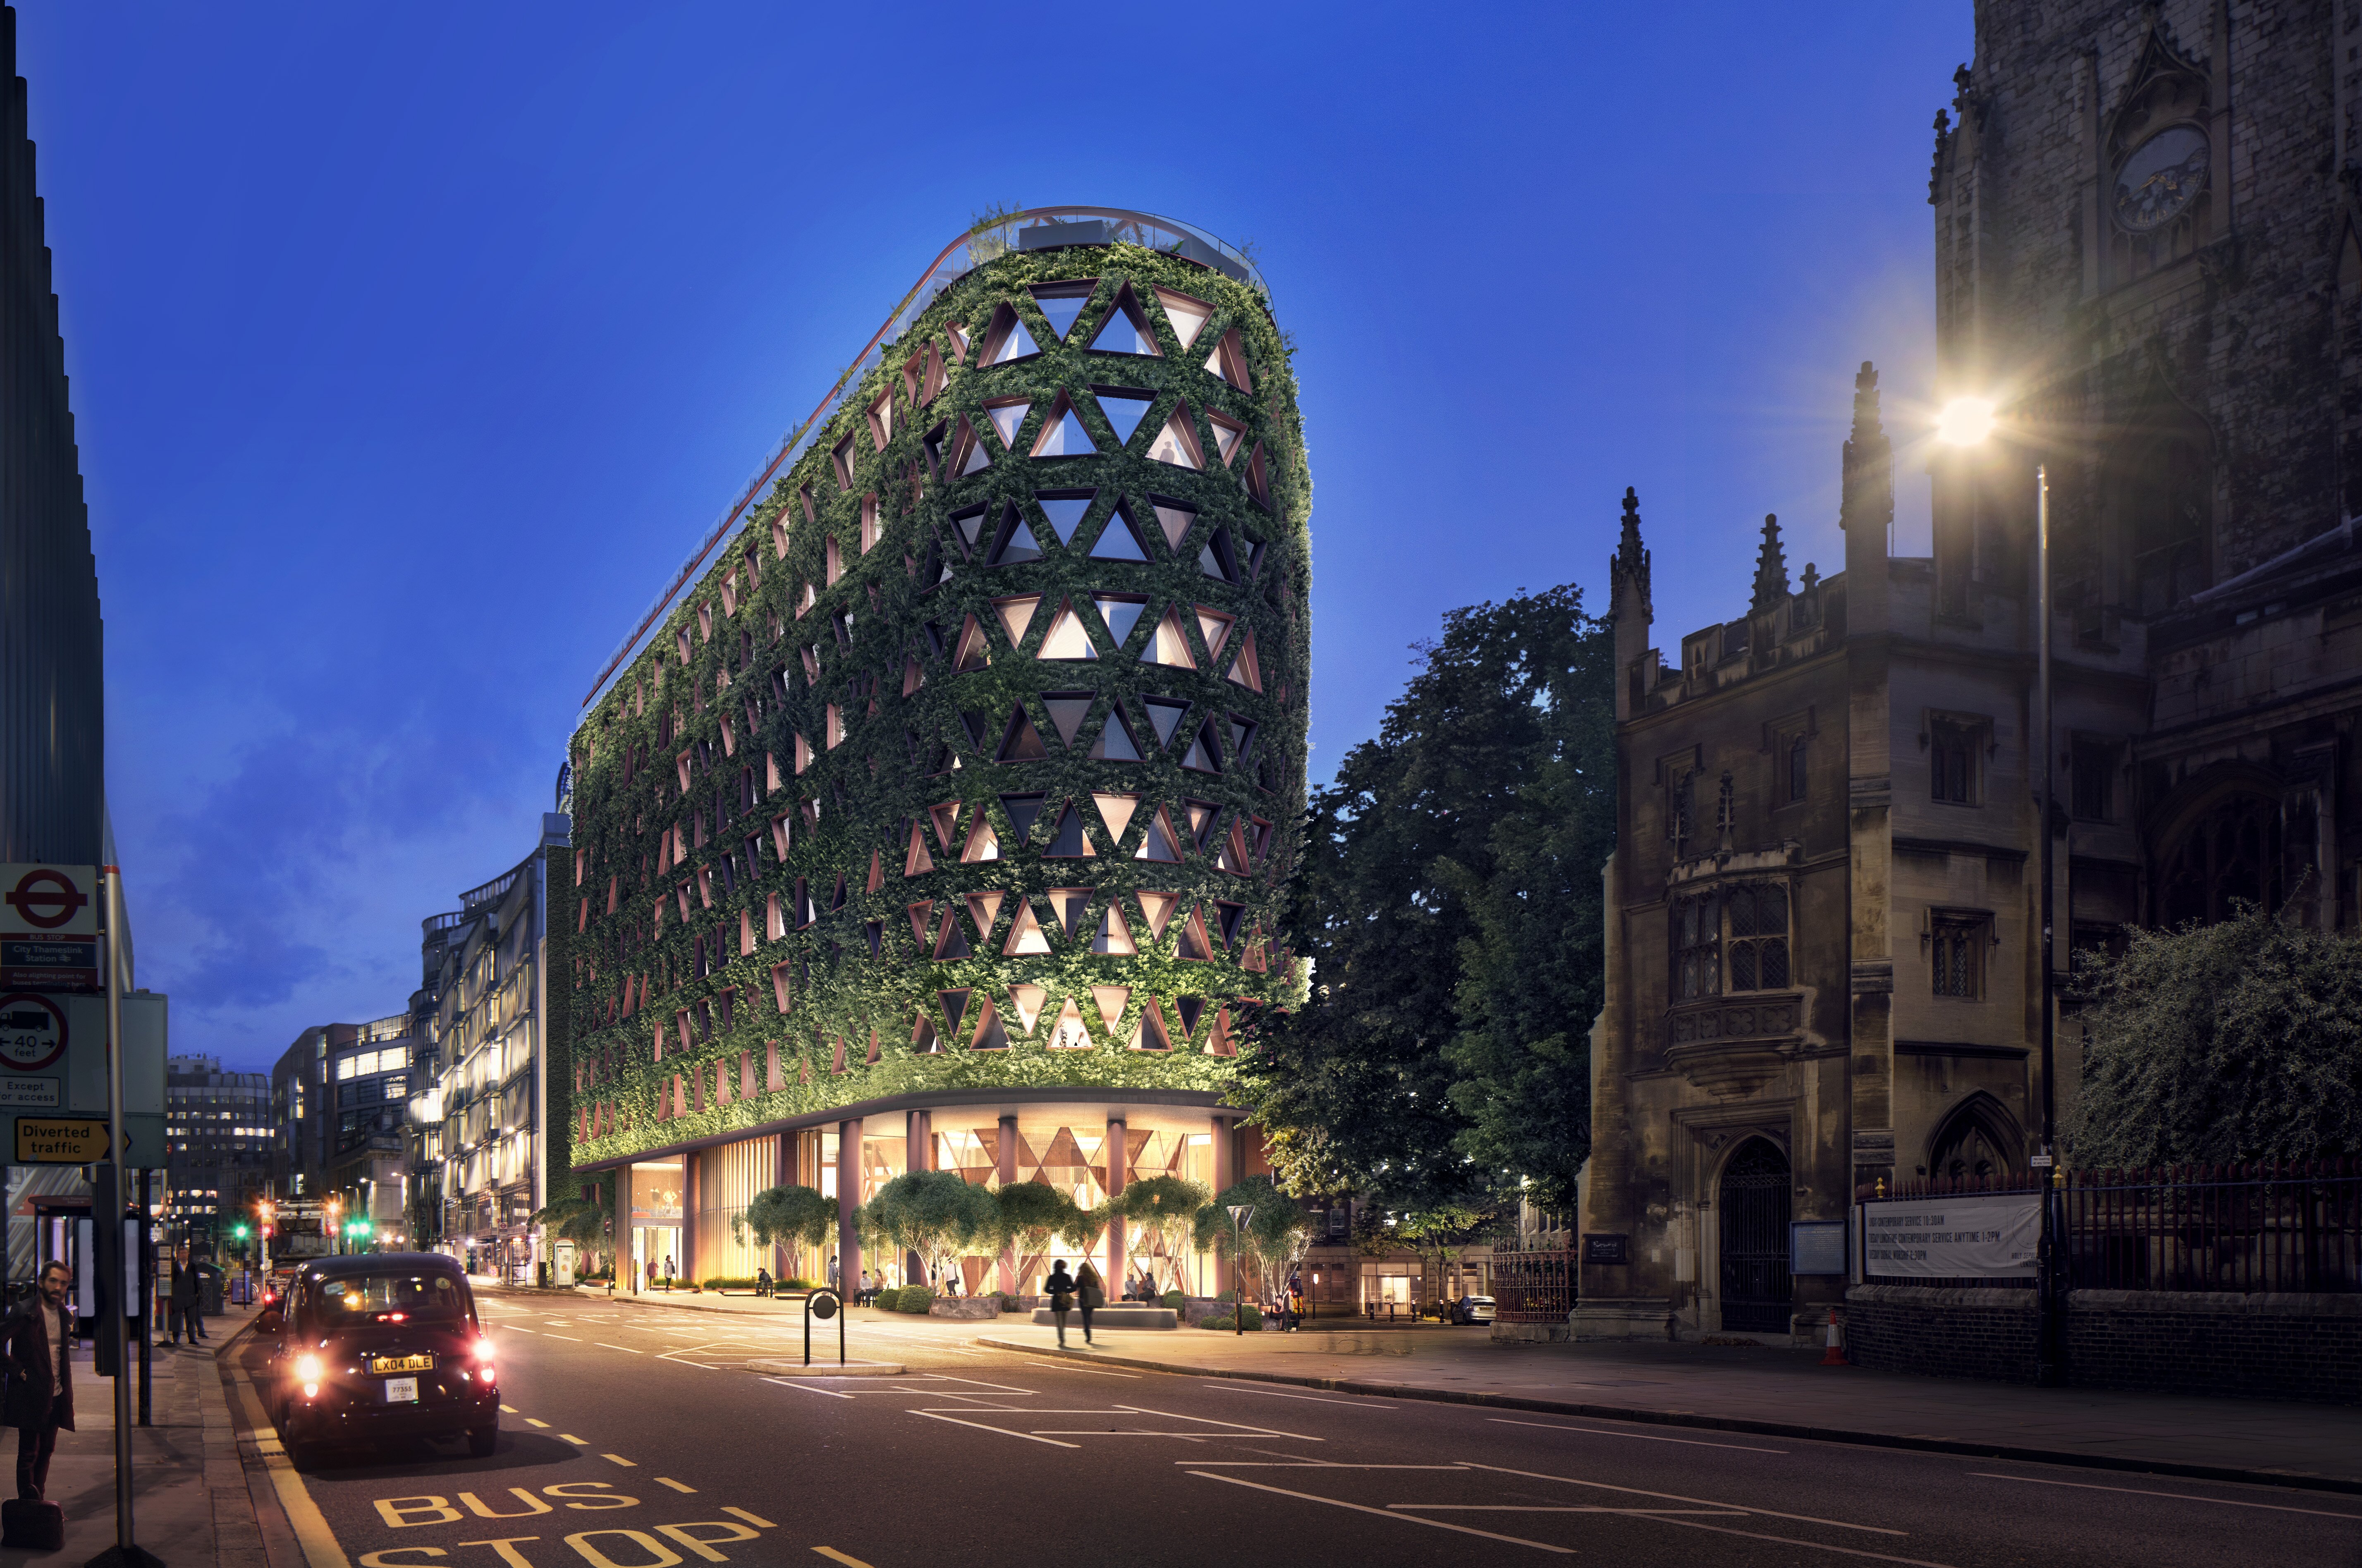 Dominvs puts Holborn Viaduct site up for sale